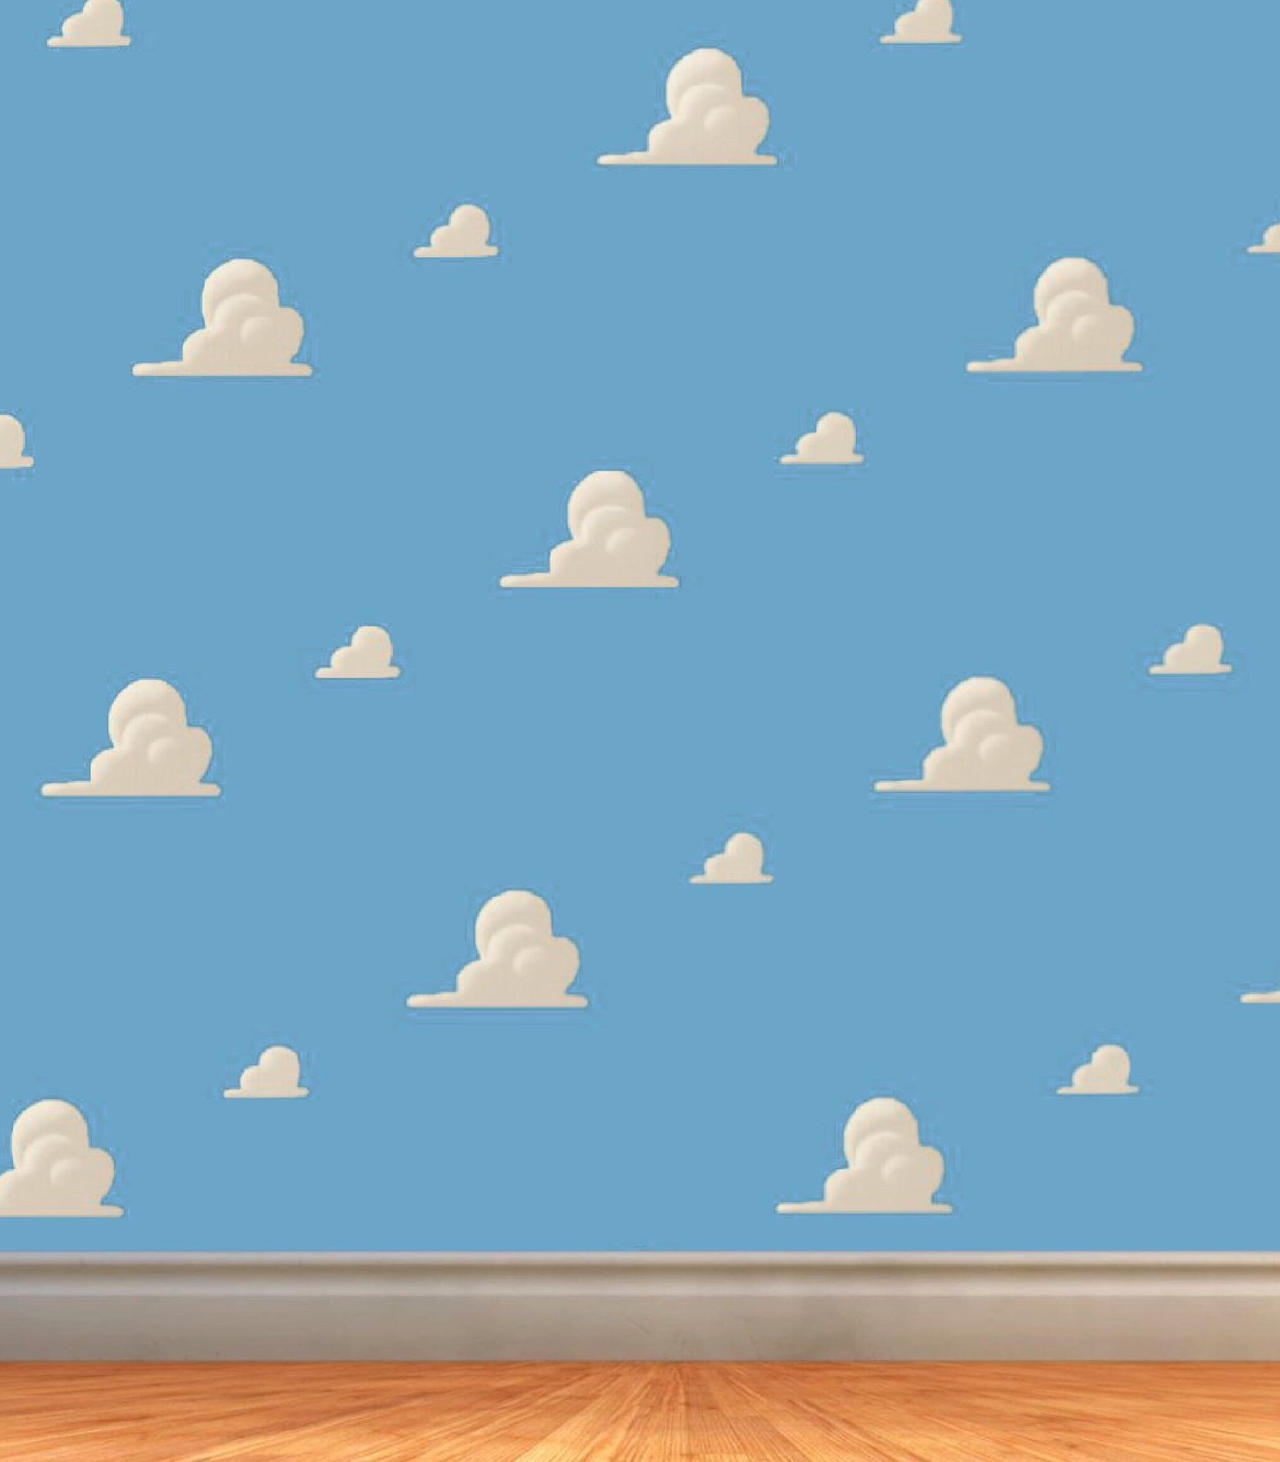 Toy Story Cloud Wallpaper Background by Luxojr888 on ...